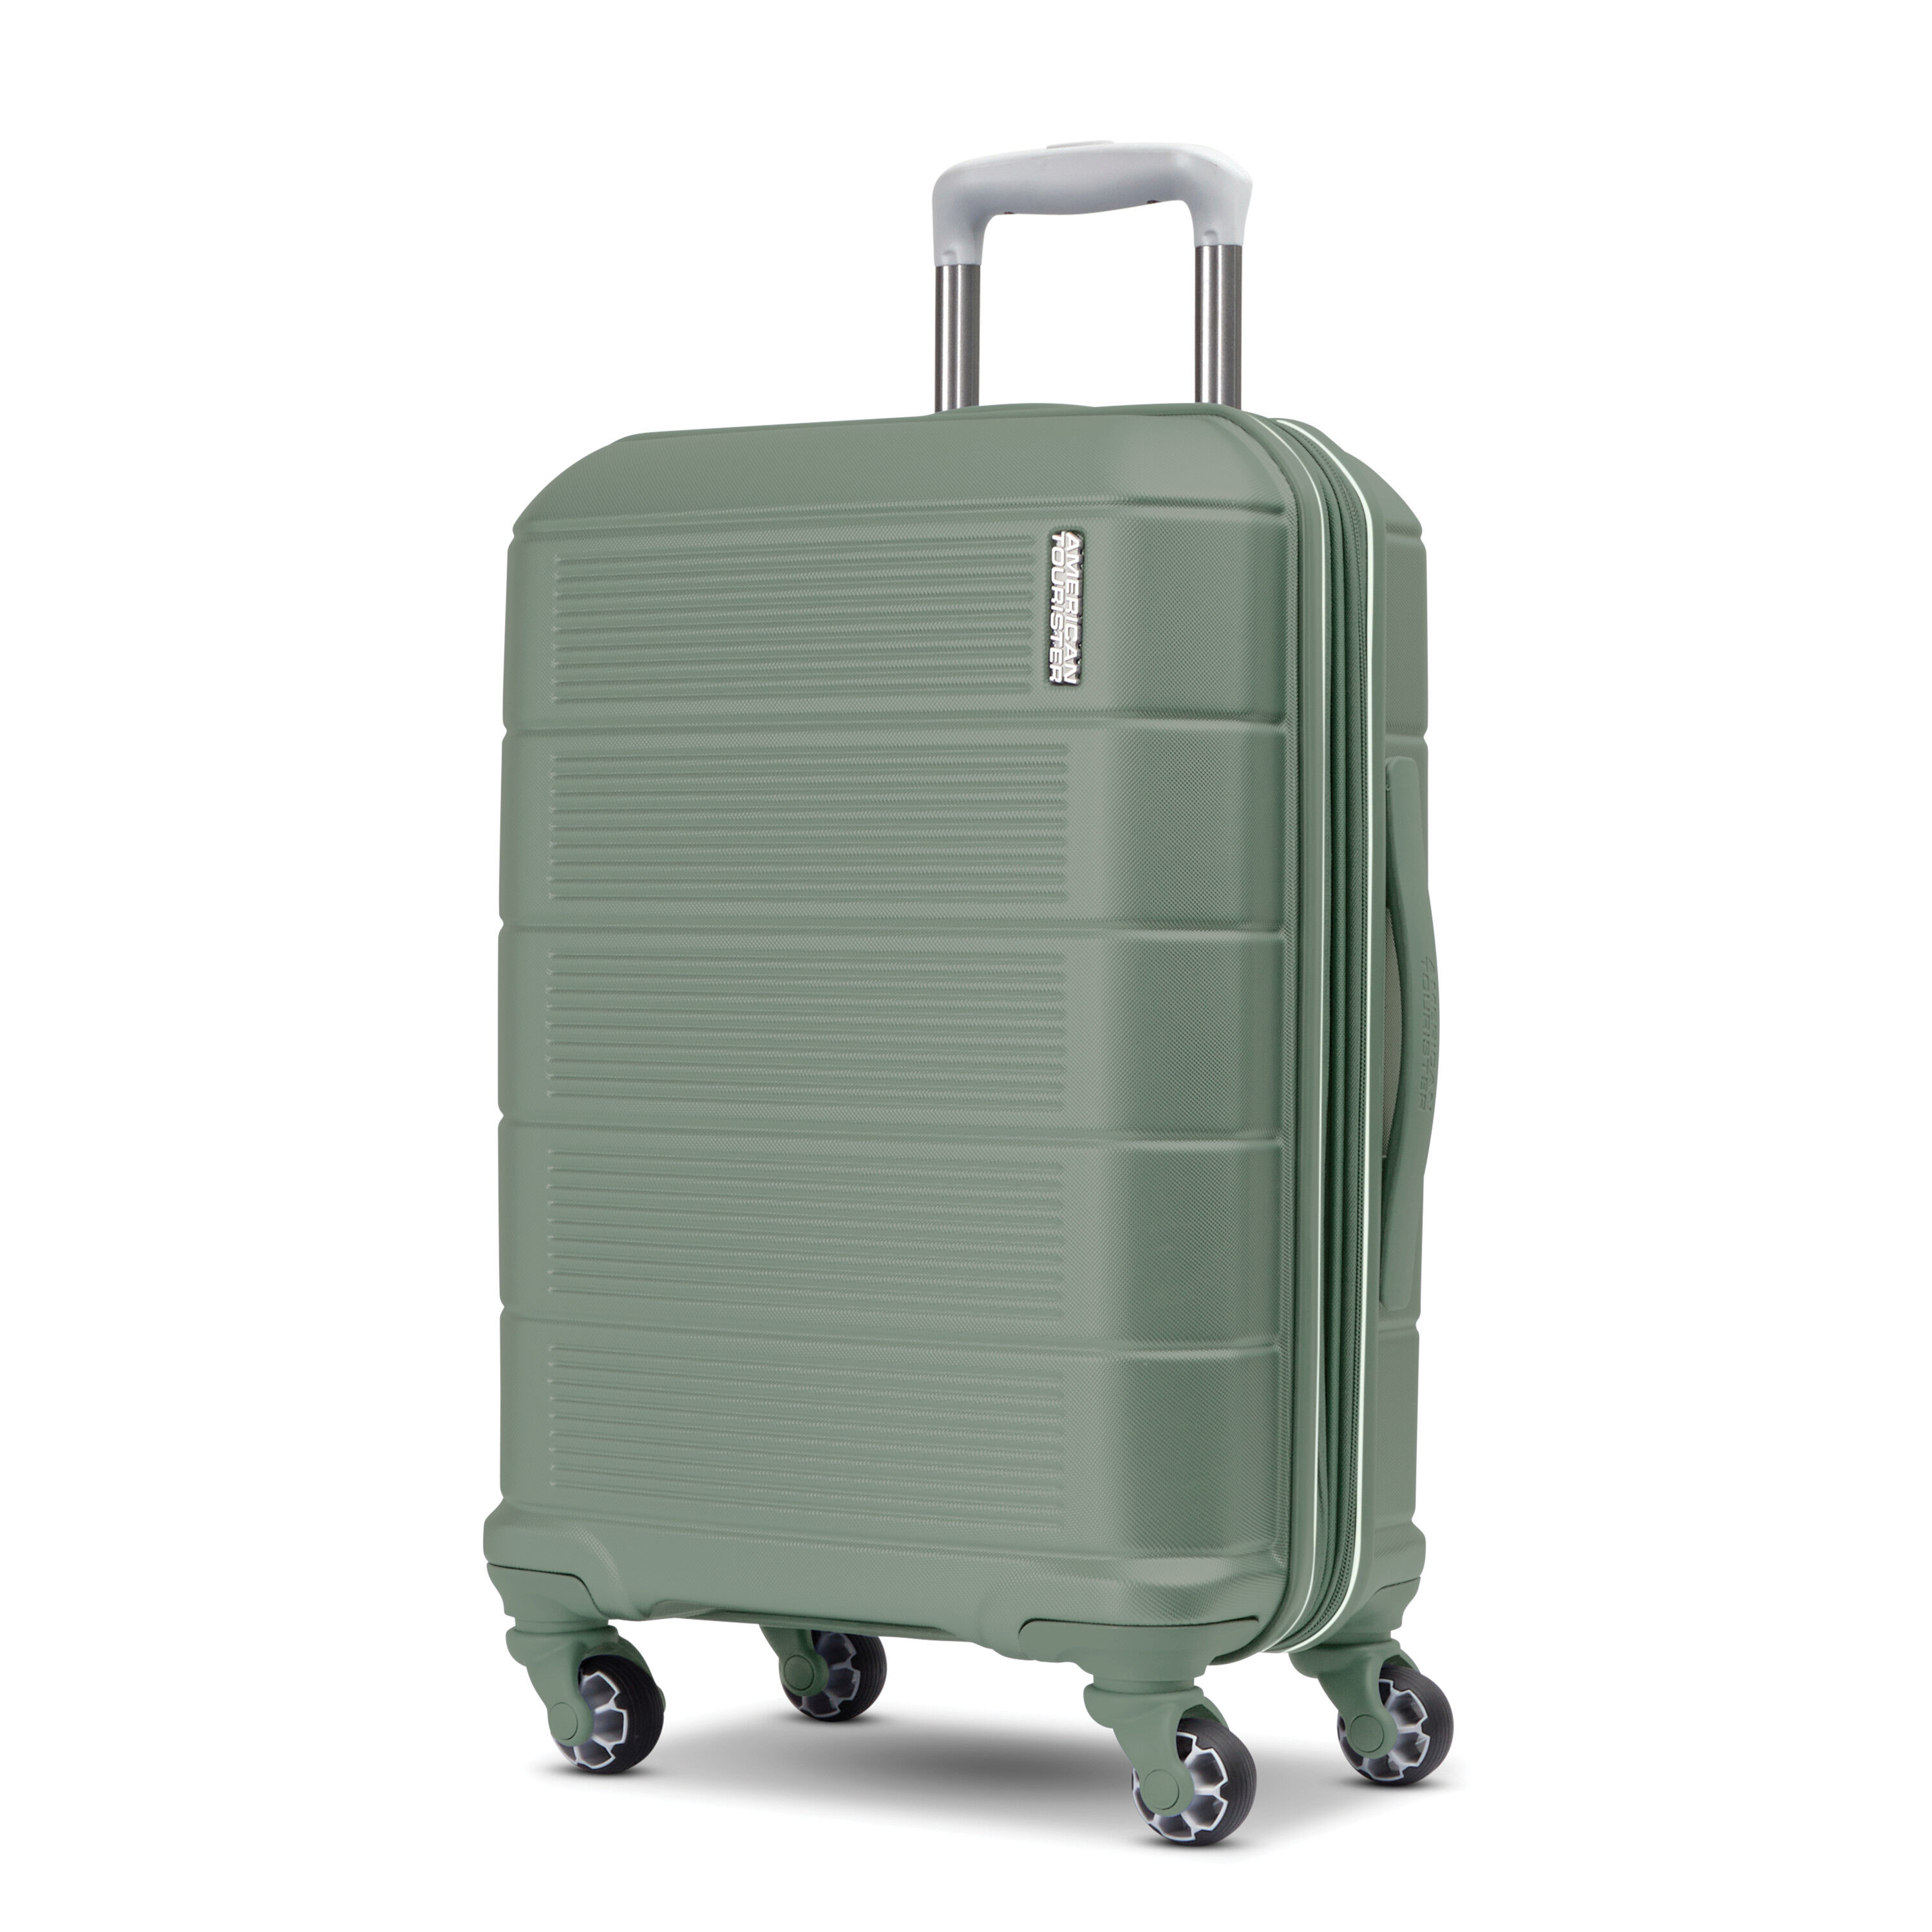 Buy American Tourister Arona Blue Polycarbonate Trolley Suitcase,21.7 Inch  Online - Suitcases - Bags & Luggage - Discontinued - Pepperfry Product